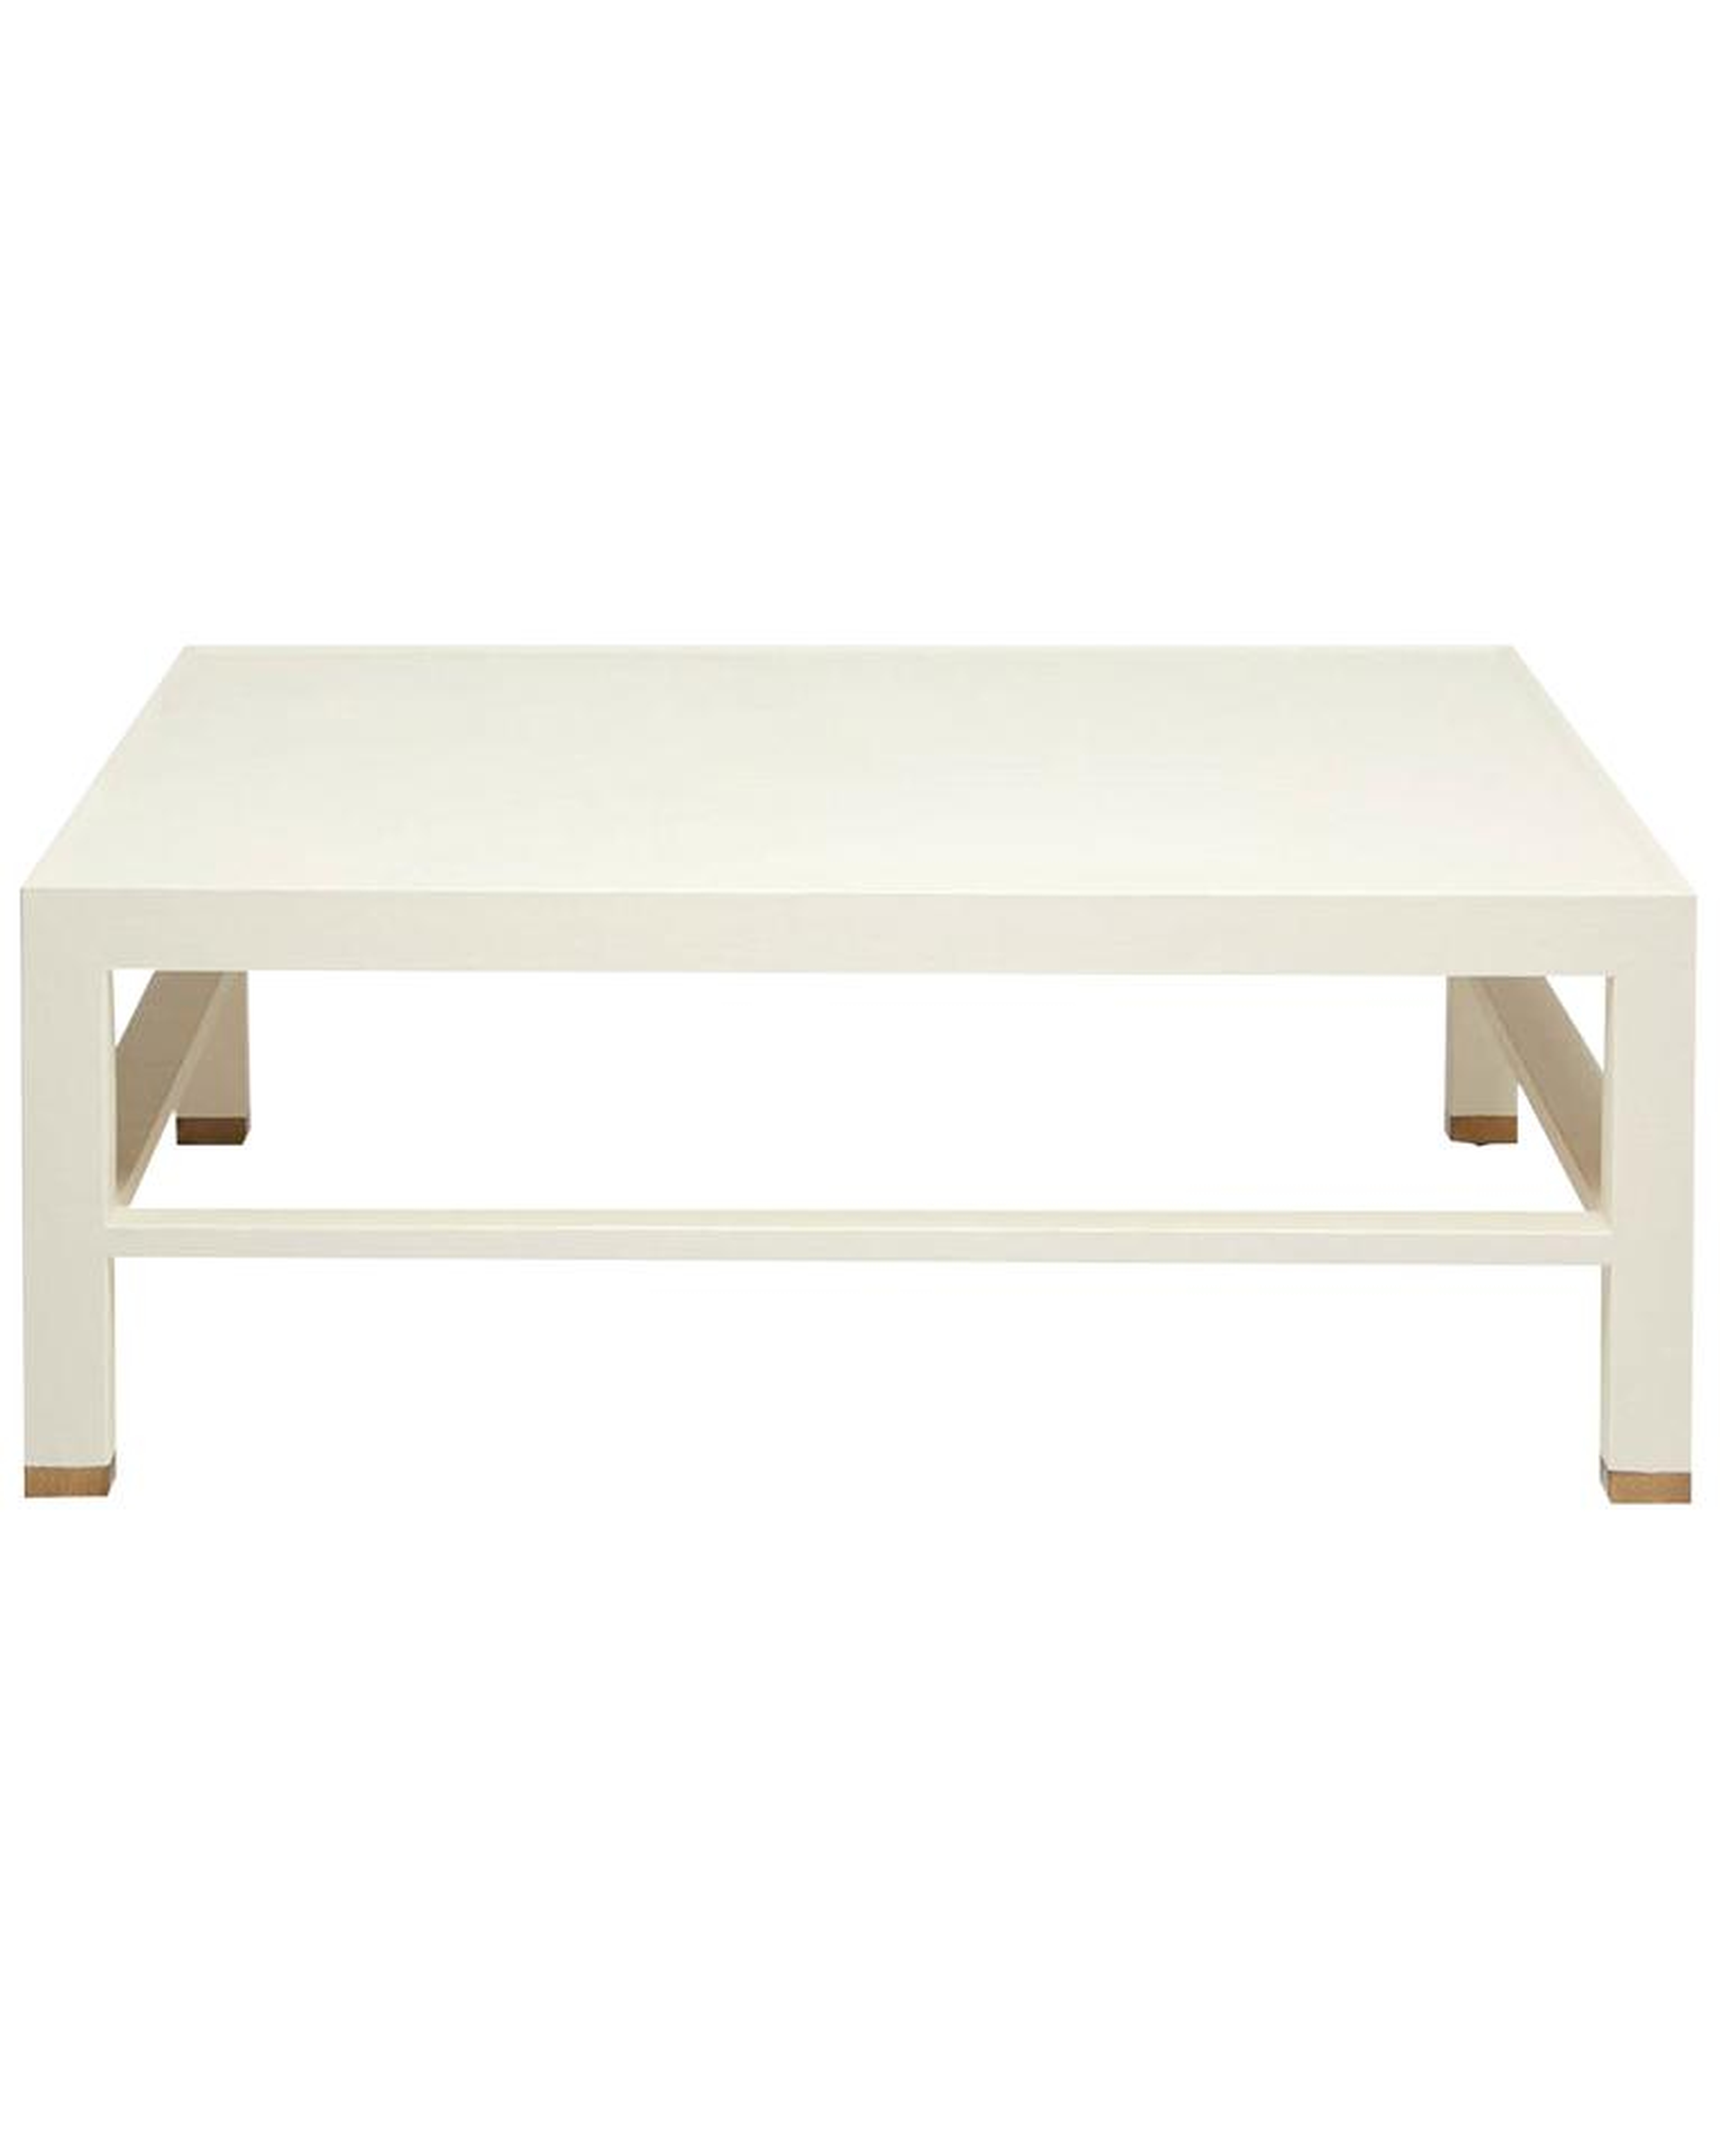 JANET COFFEE TABLE, OFF-WHITE - McGee & Co.